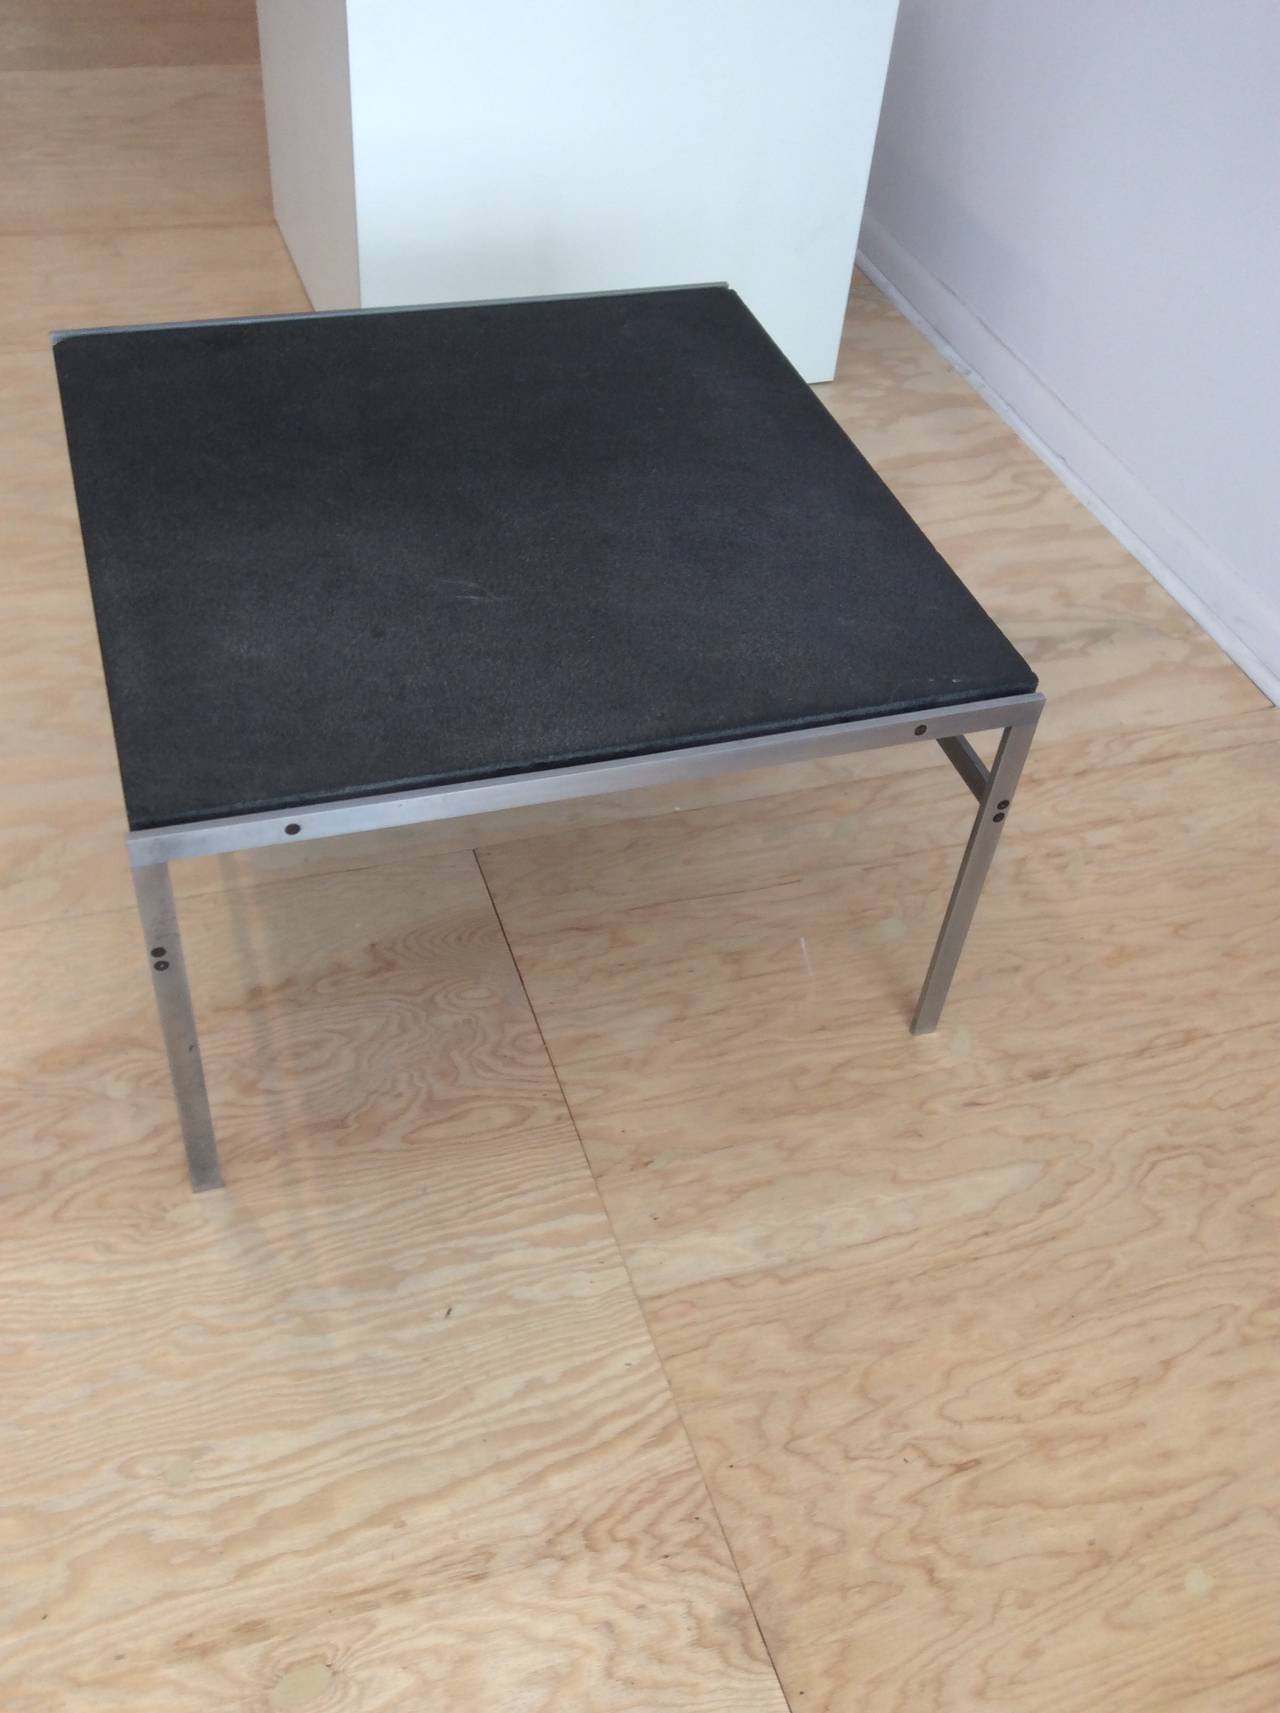 Slate and steel coffee table by Preben Fabricius and Jorgensen Kastholm for Bo-EX APS. Made in Denmark.please notice there is a chip in the slate.